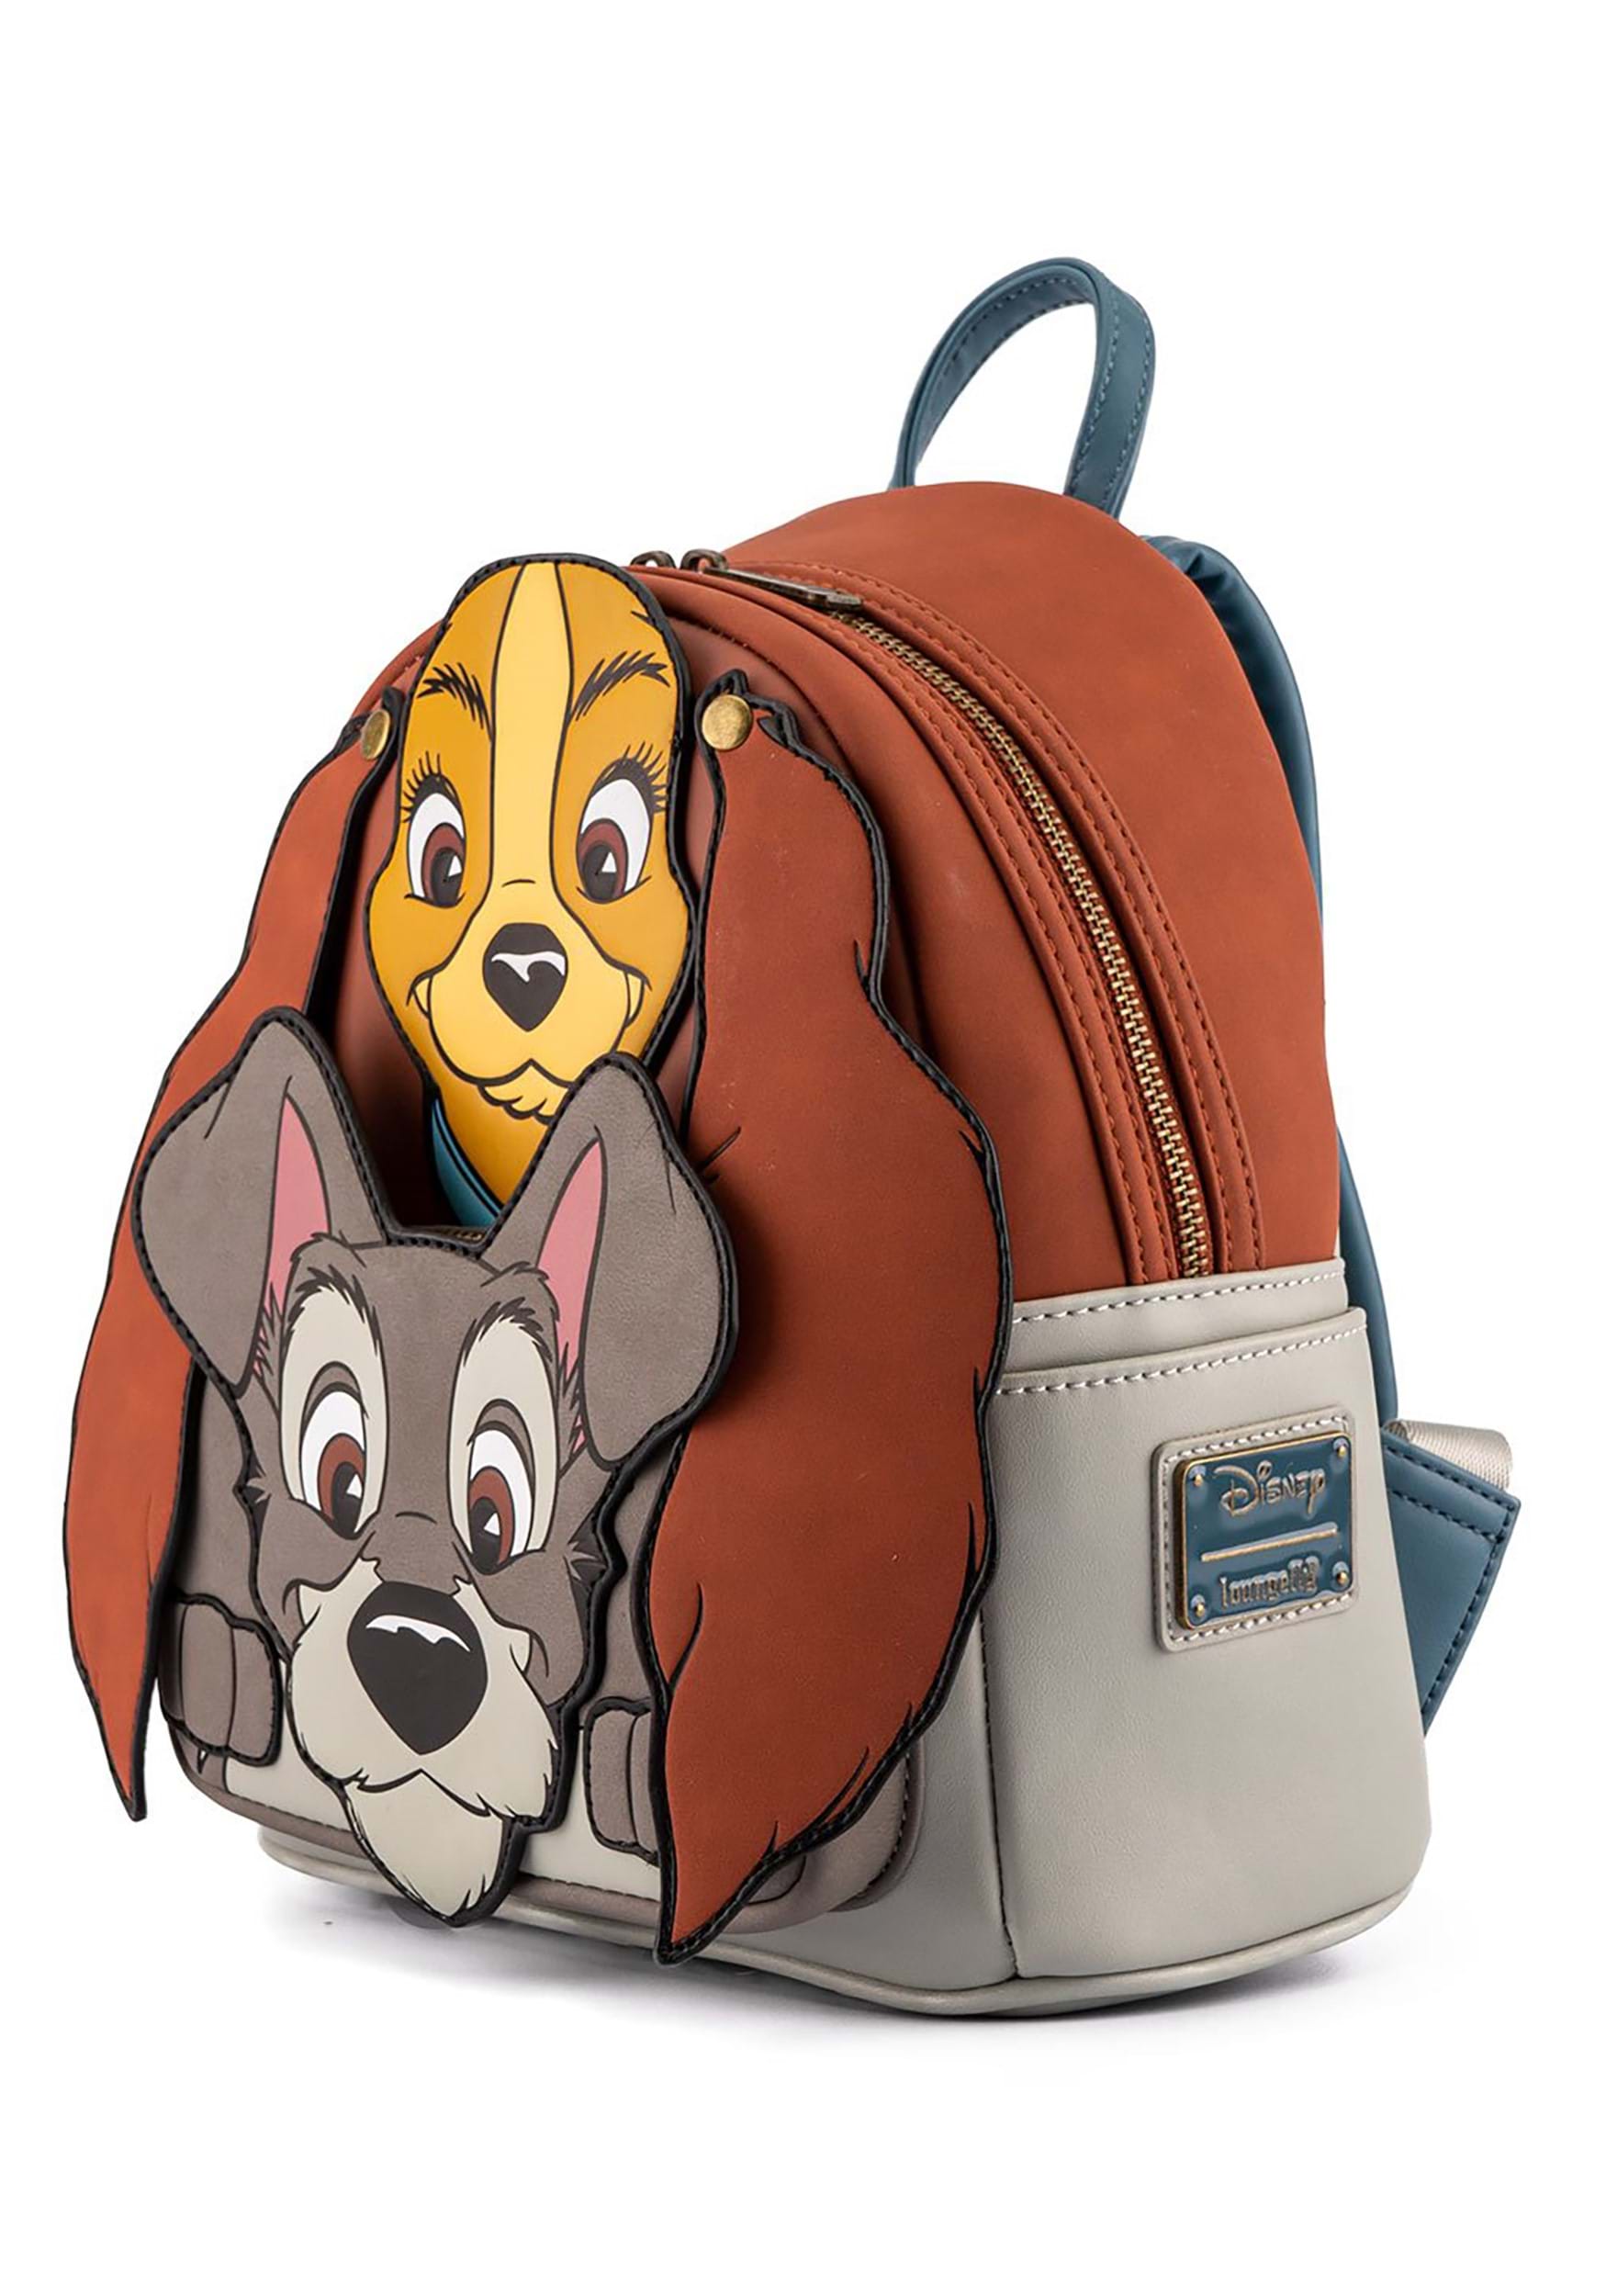 Official Loungefly Disney The Lady and The Tramp Mini Backpack Bag Rucksack 